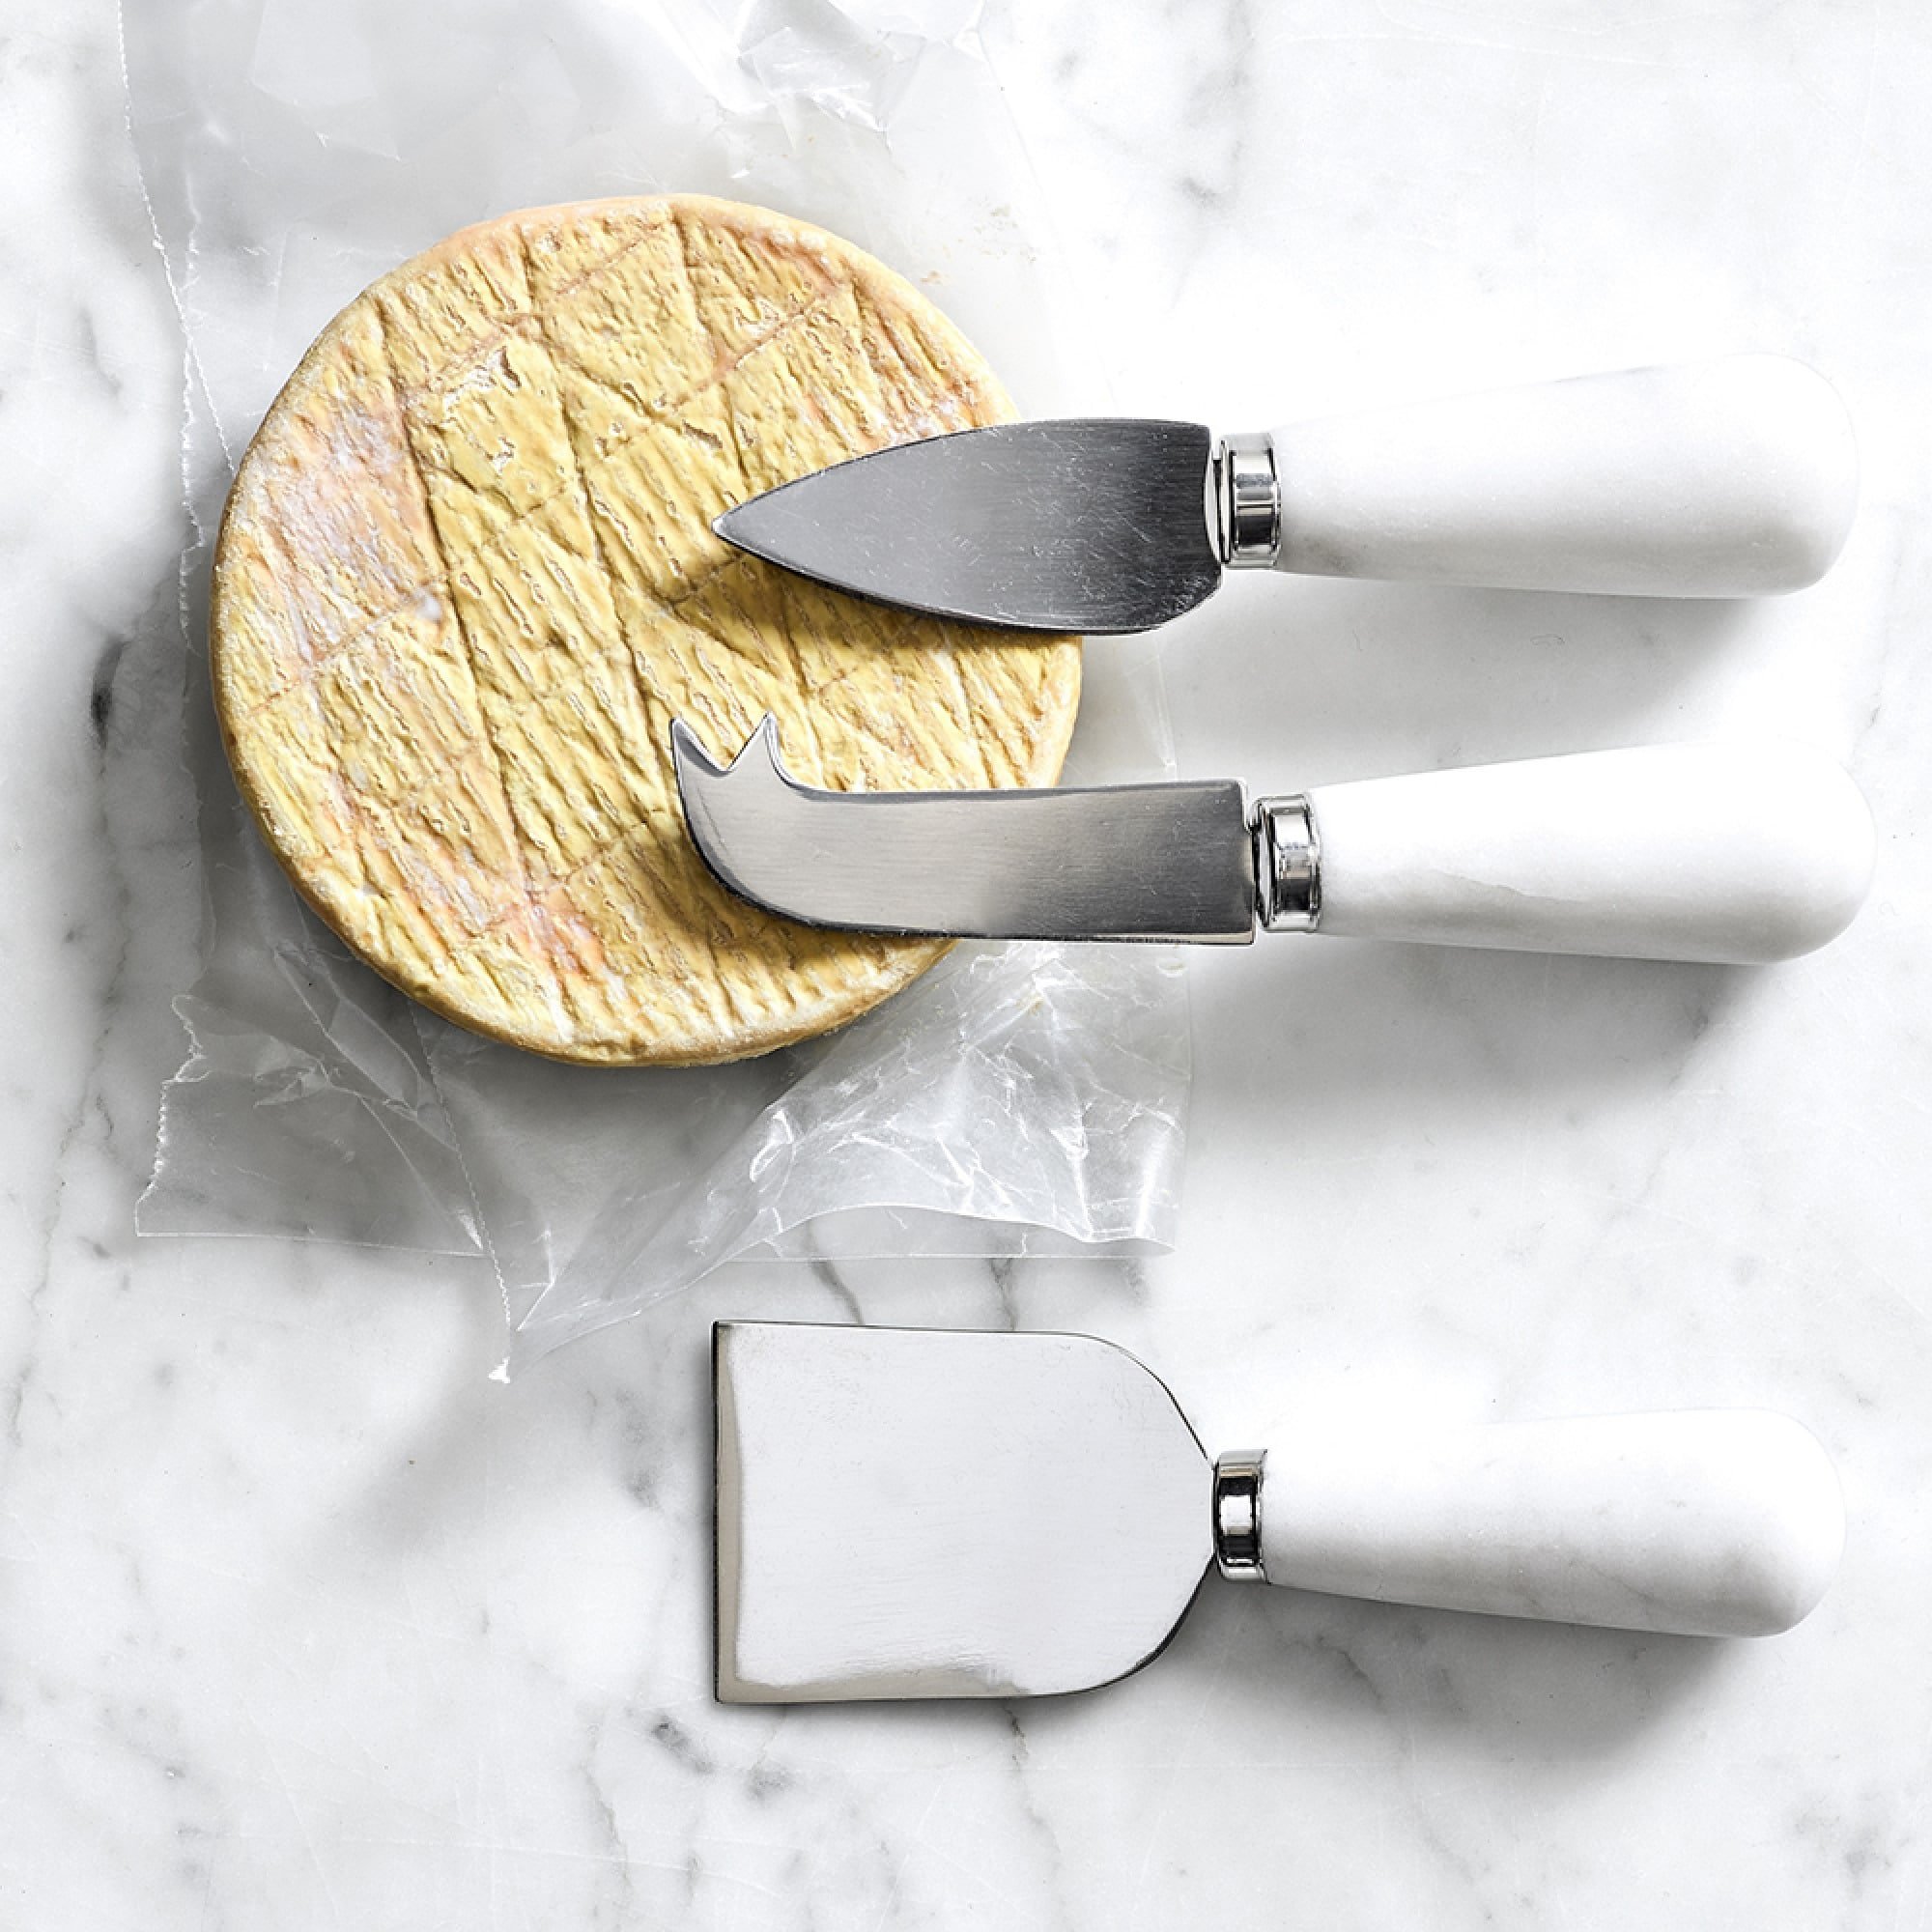 wedding registry ideas Marble cheese knives from williams sonoma